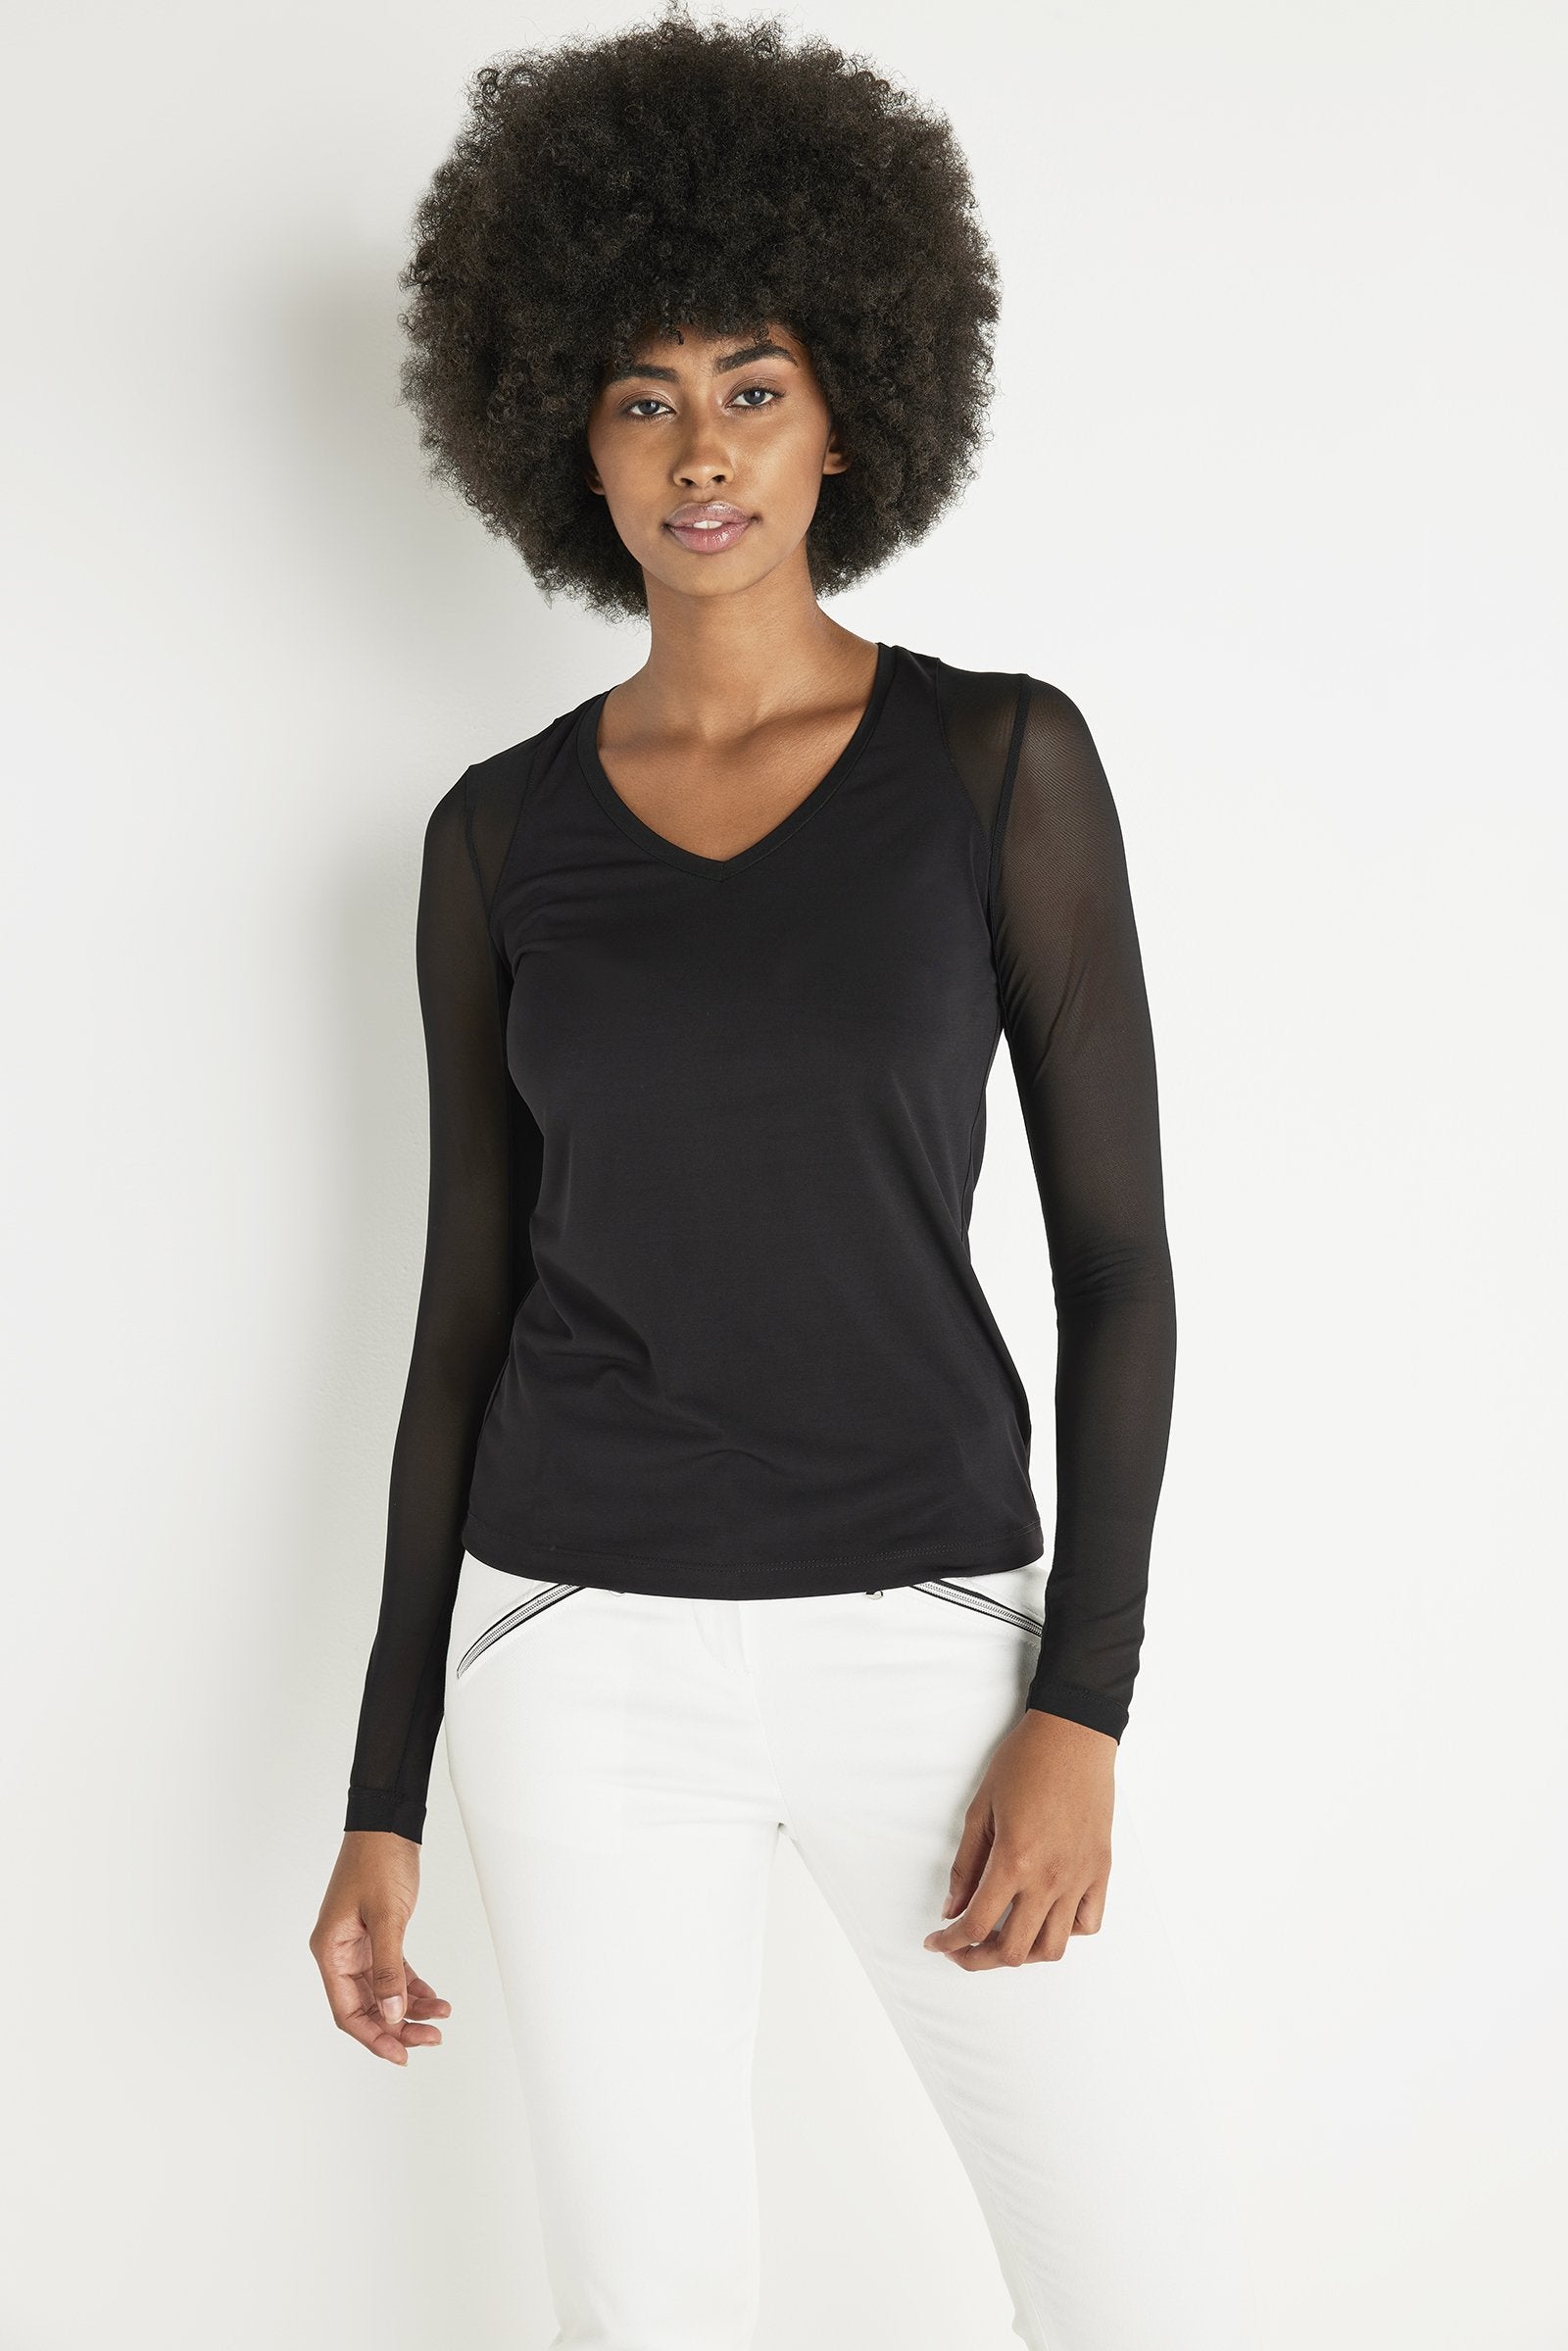 Meet Isla: our newest sillouette stylish member, truly a must-have lightweight long-sleeve top crafted in super soft stretch jersey and power mesh  blend with elegant signature stretch power mesh sleeves and front and back panels. A sleek silhouette and V-neck front with mesh overlay make it a modern wardrobe essential for travel and everyday. 